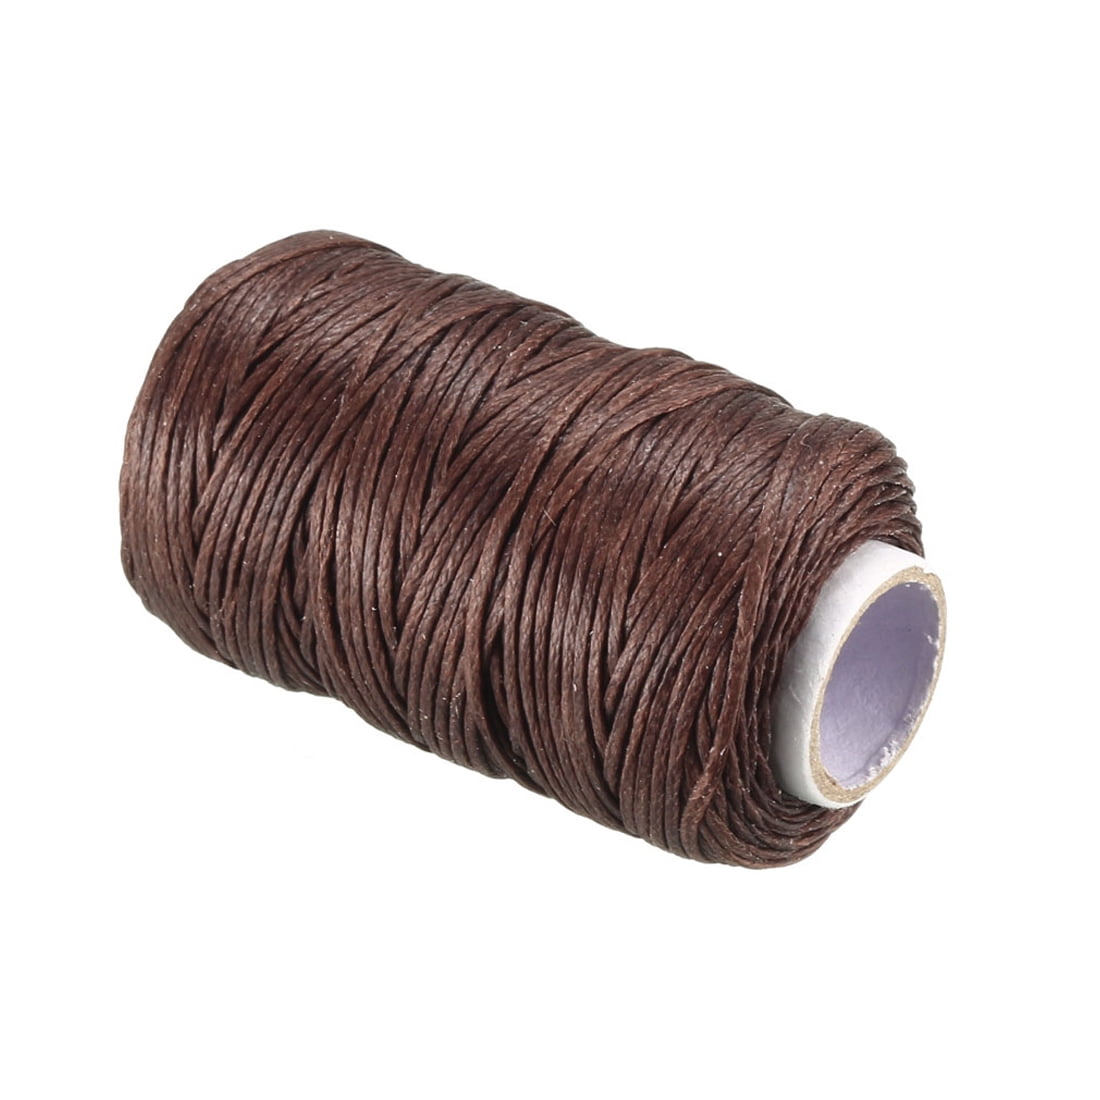 260M/Roll Waxed Cord Leather Sewing Waxed Thread For Upholstery Bags Shoes  Leather Tools Material Accessories Stitching String From Piterr, $42.91